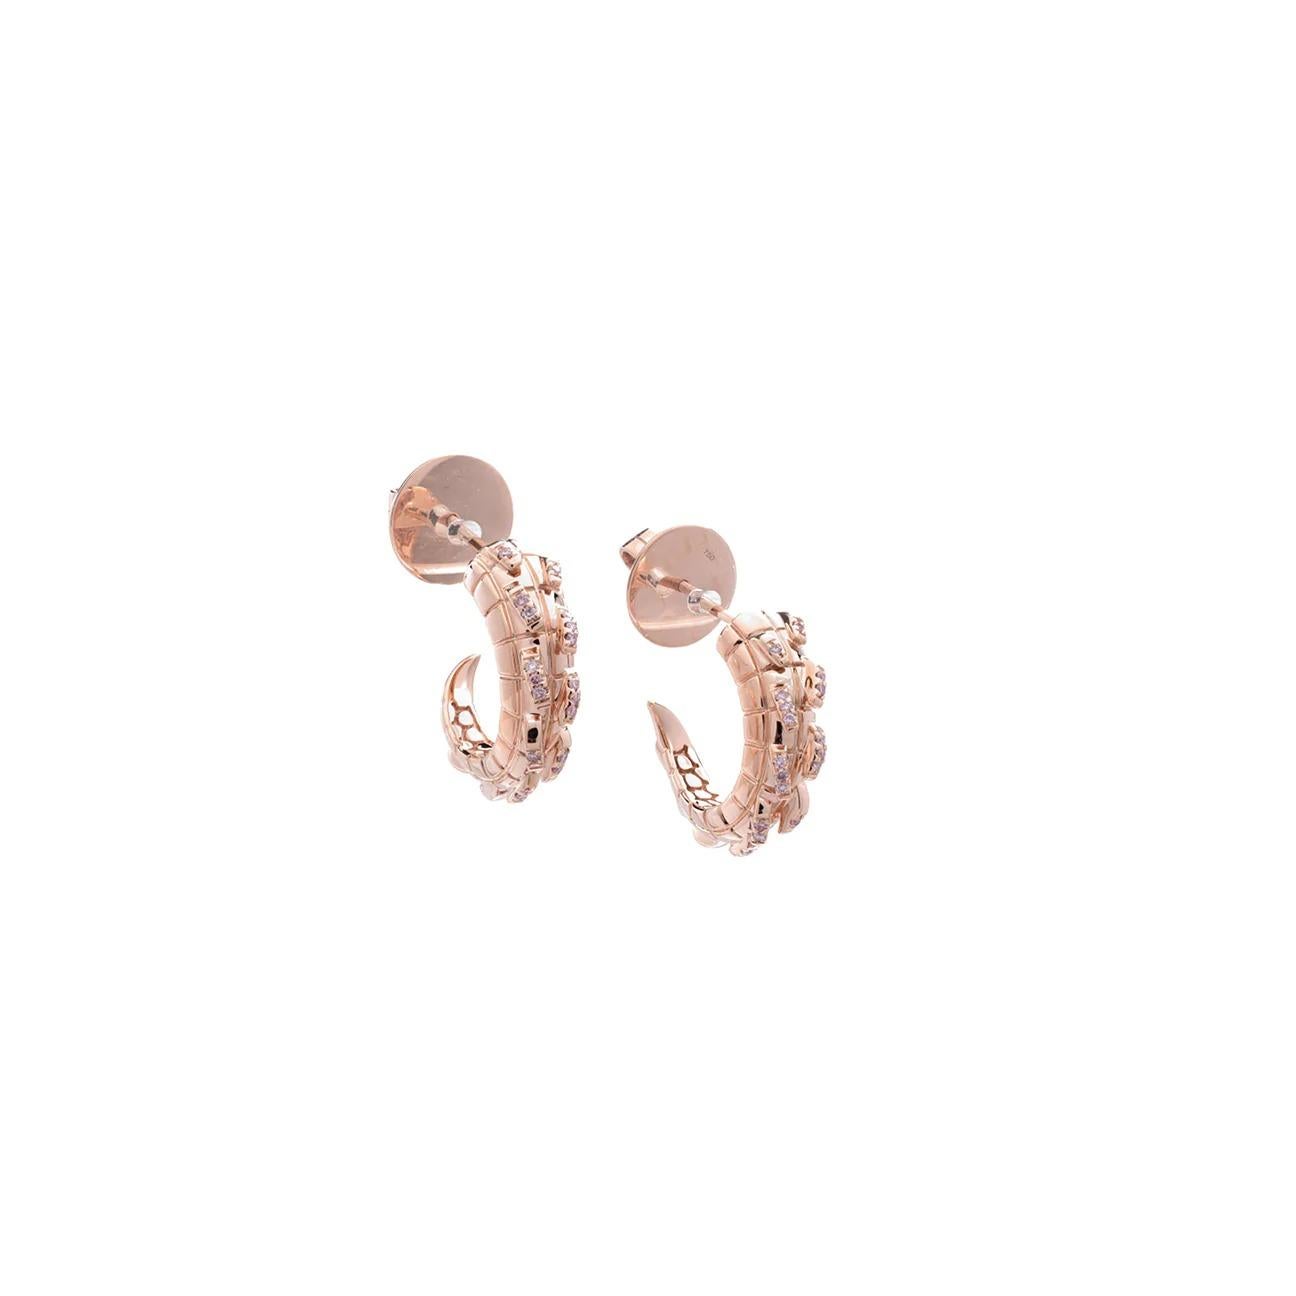 A sophisticated pair of hoops with a fierce edge. Embellished with exquisitely rare Australian Argyle Pink diamonds for an elevated day to night look, these hoops bear all the subtle hallmarks of exceptional craftsmanship. A tapering, spiked tail